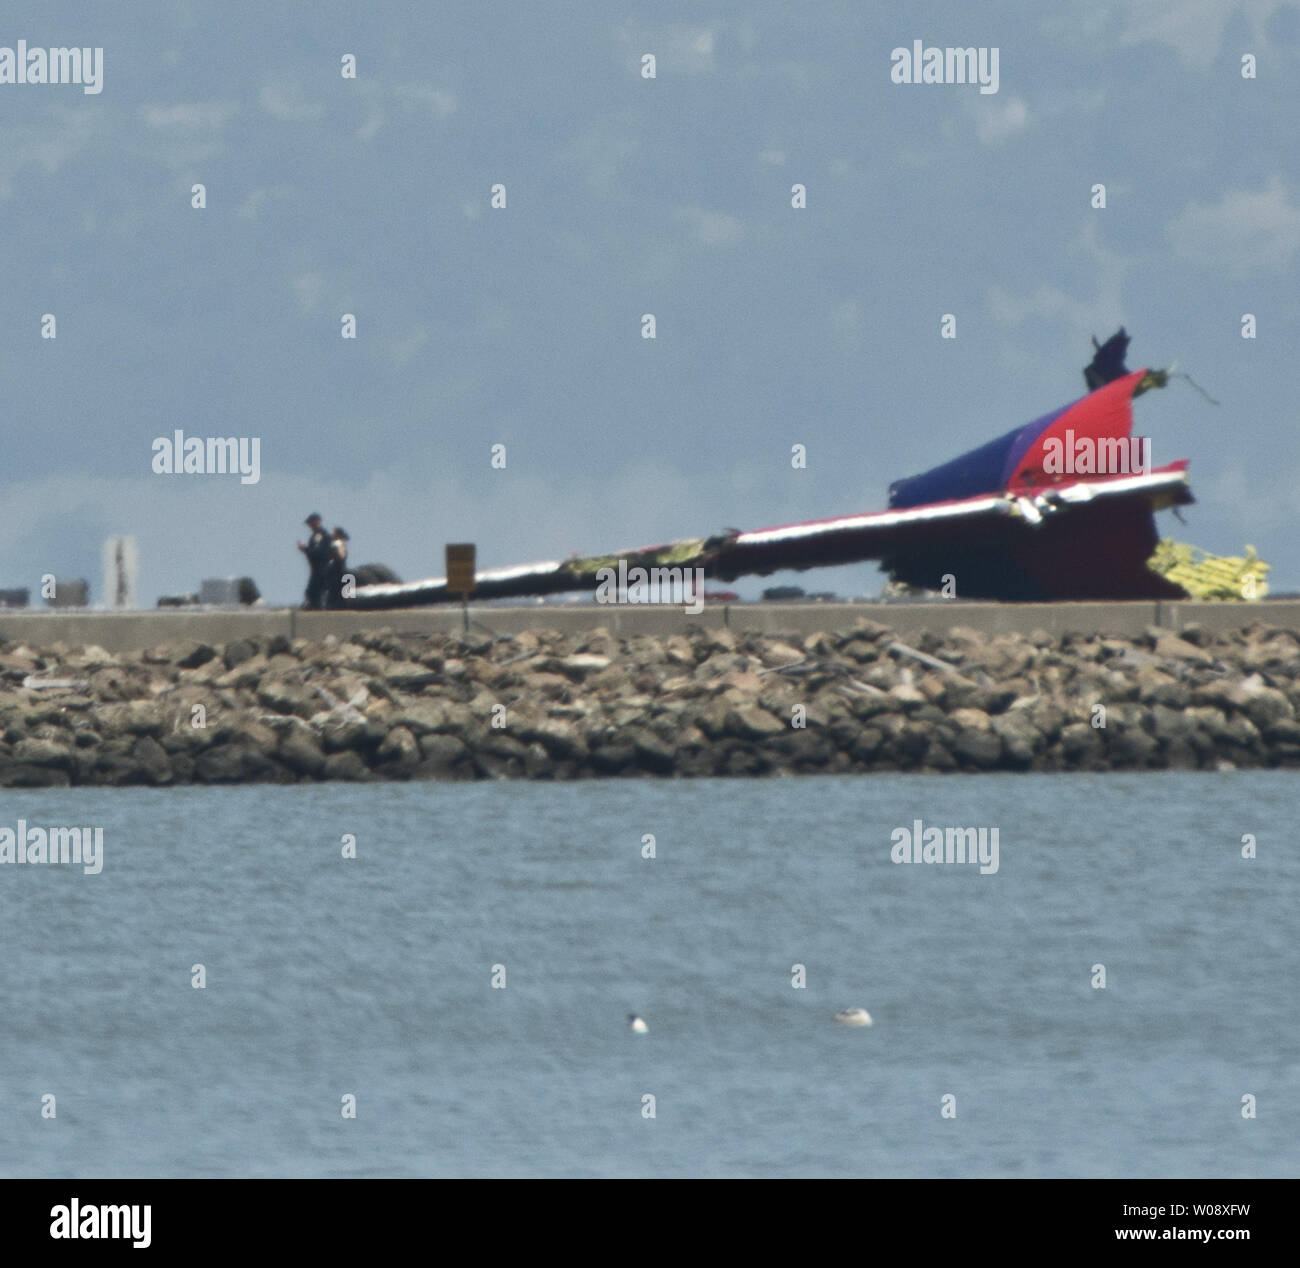 Officials walk past the tail of an Asiana Air Boeing 777 on the runway at San Francisco International Airport after it crashed on landing in San Francisco on July 6, 2013. The plane was arriving from Seoul.    UPI/Terry Schmitt Stock Photo